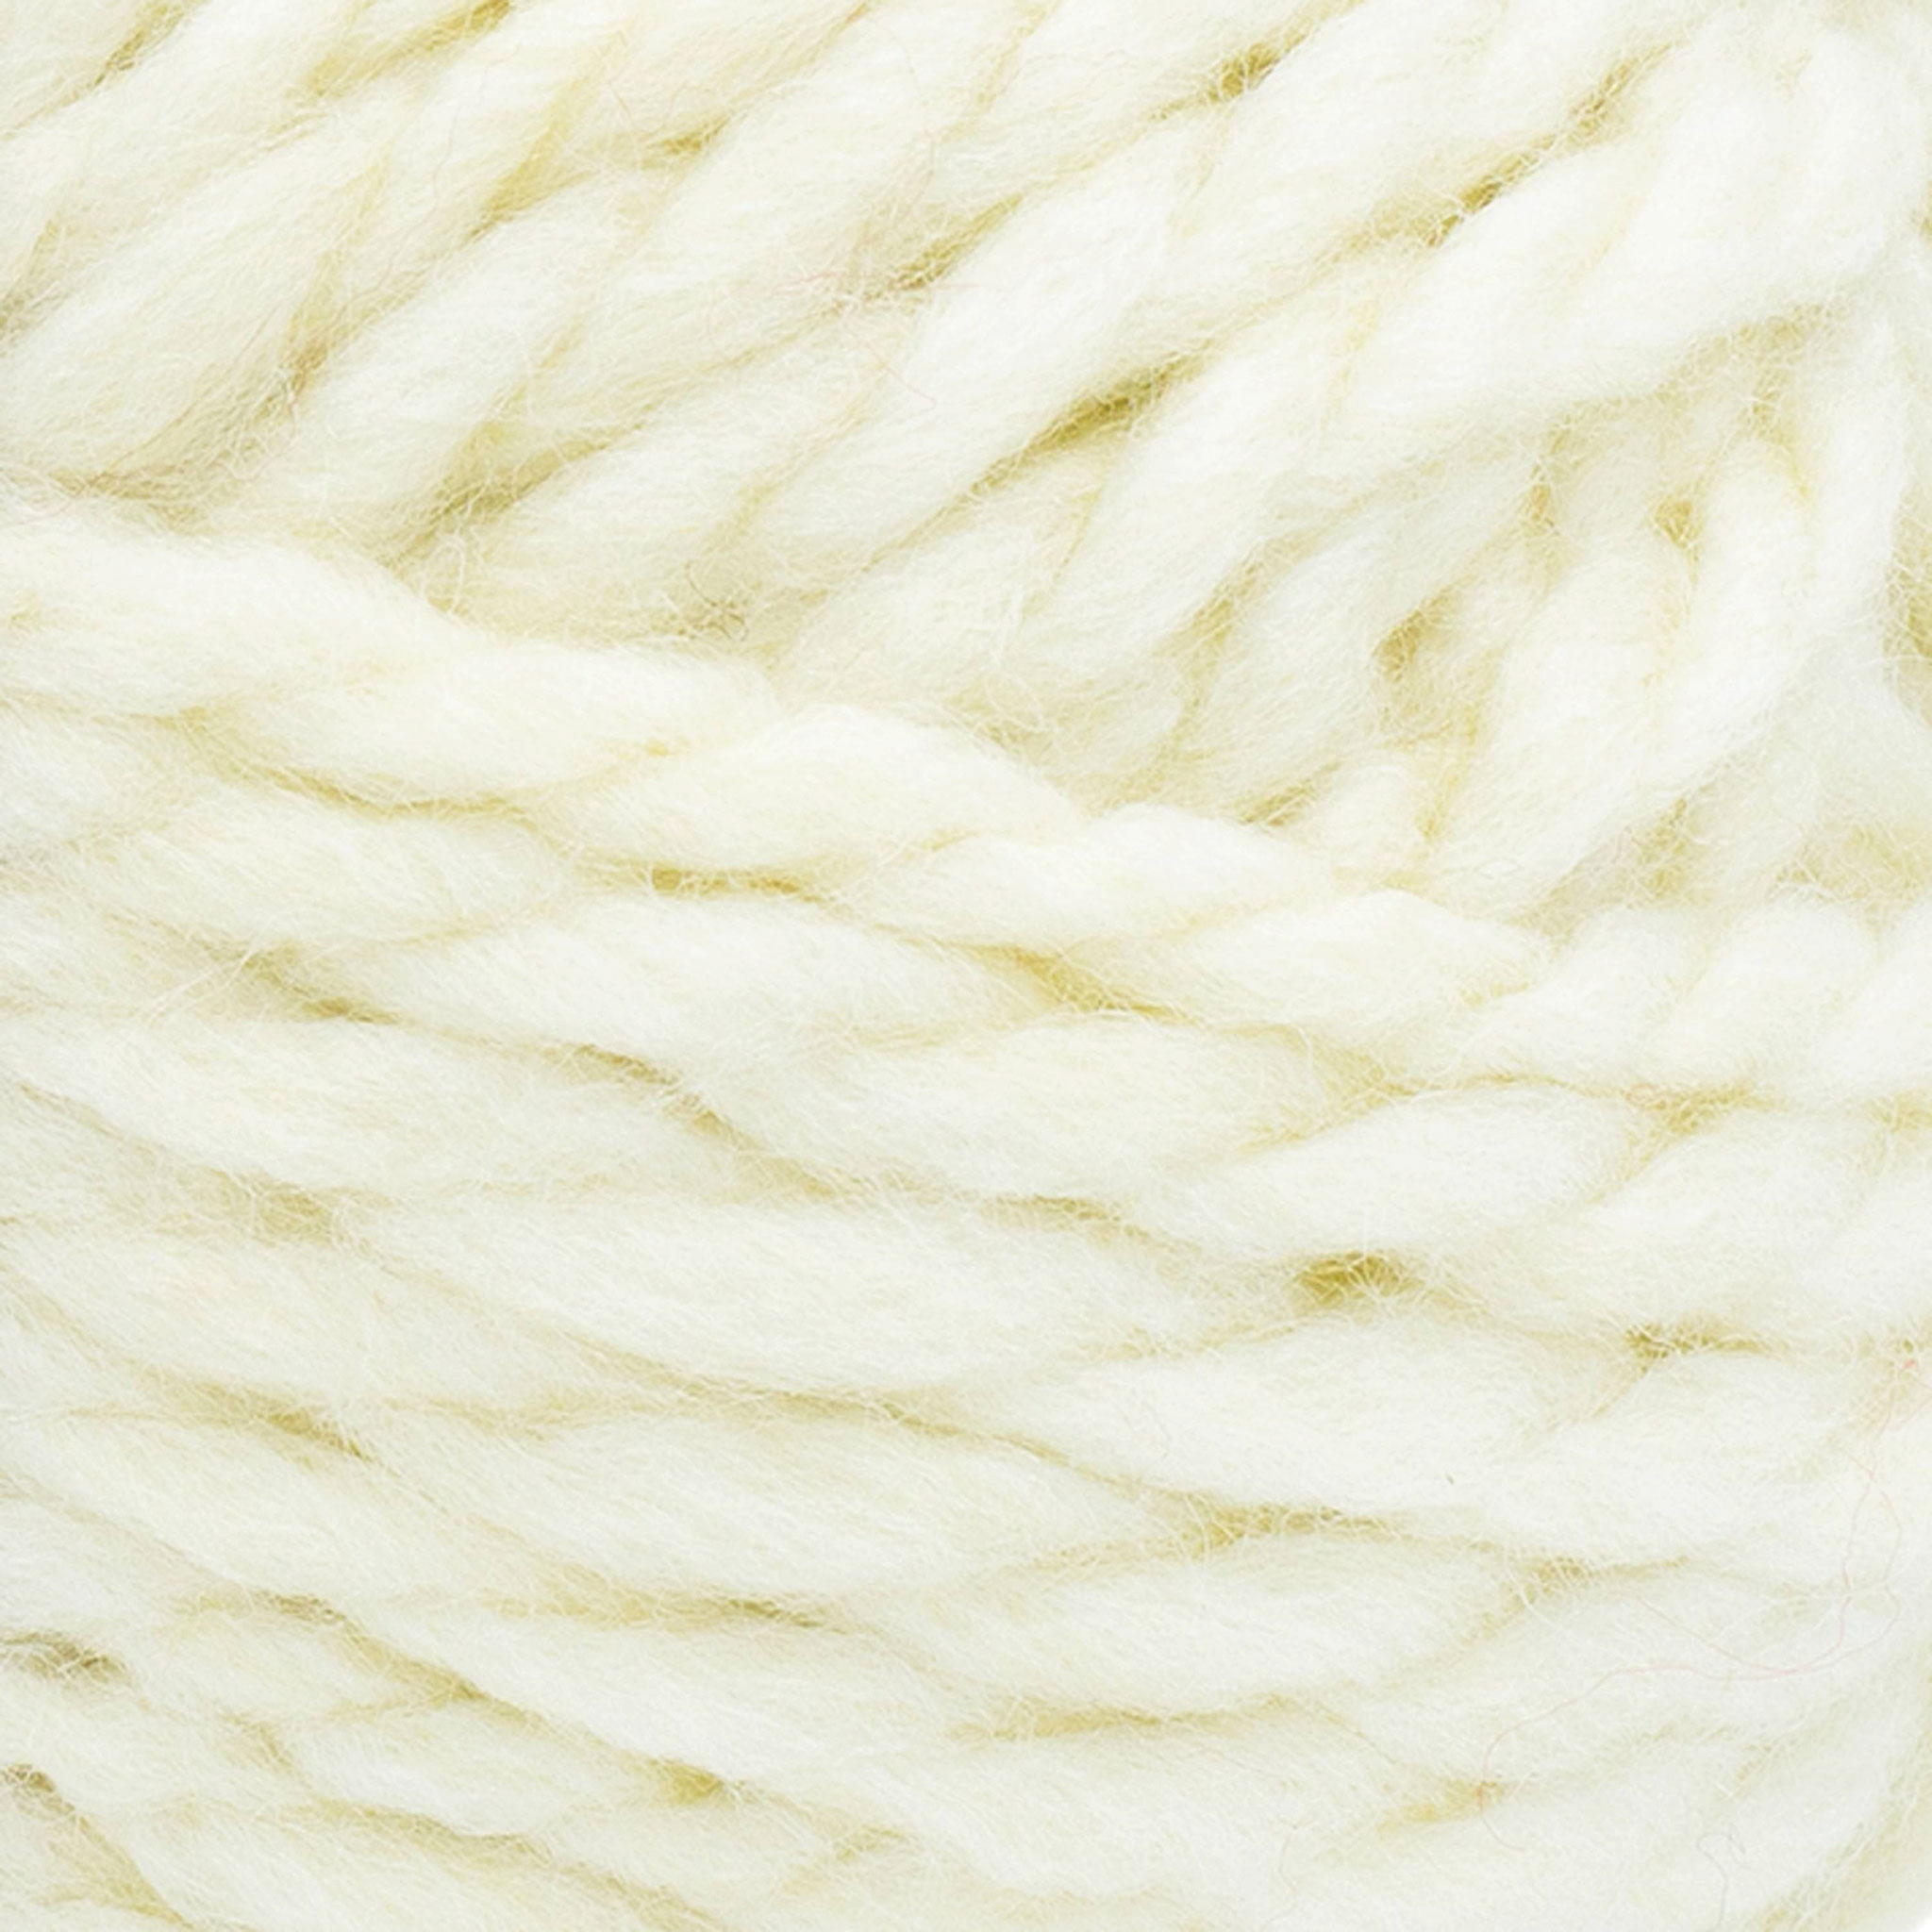 Lion Brand Wool-Ease Thick & Quick Yarn-Seaglass, 1 count - Harris Teeter